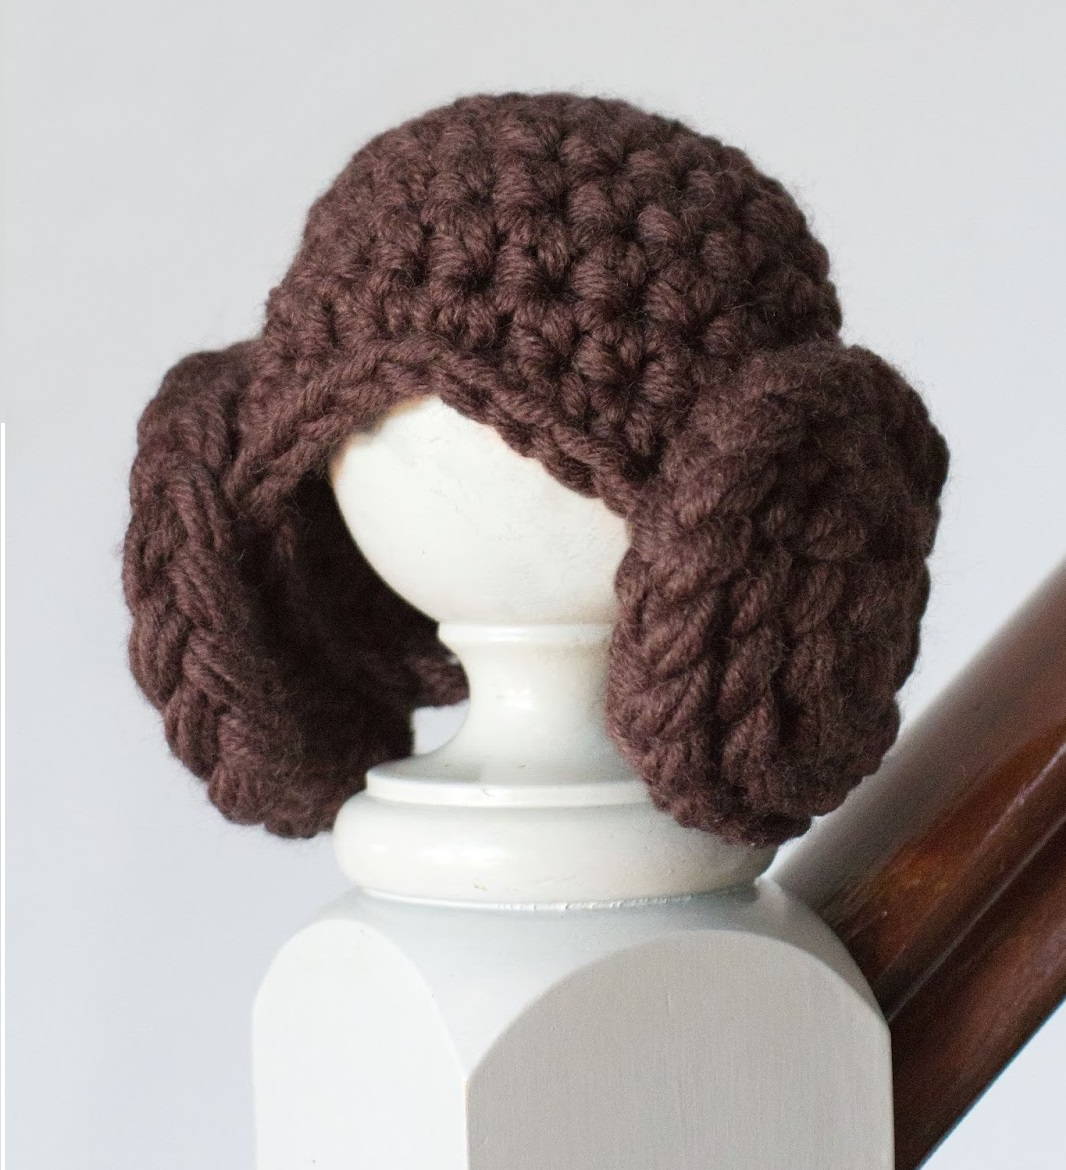 Hair Crochet Patterns The Star Wars Crochet Patterns Youre Looking For Stitch And Unwind